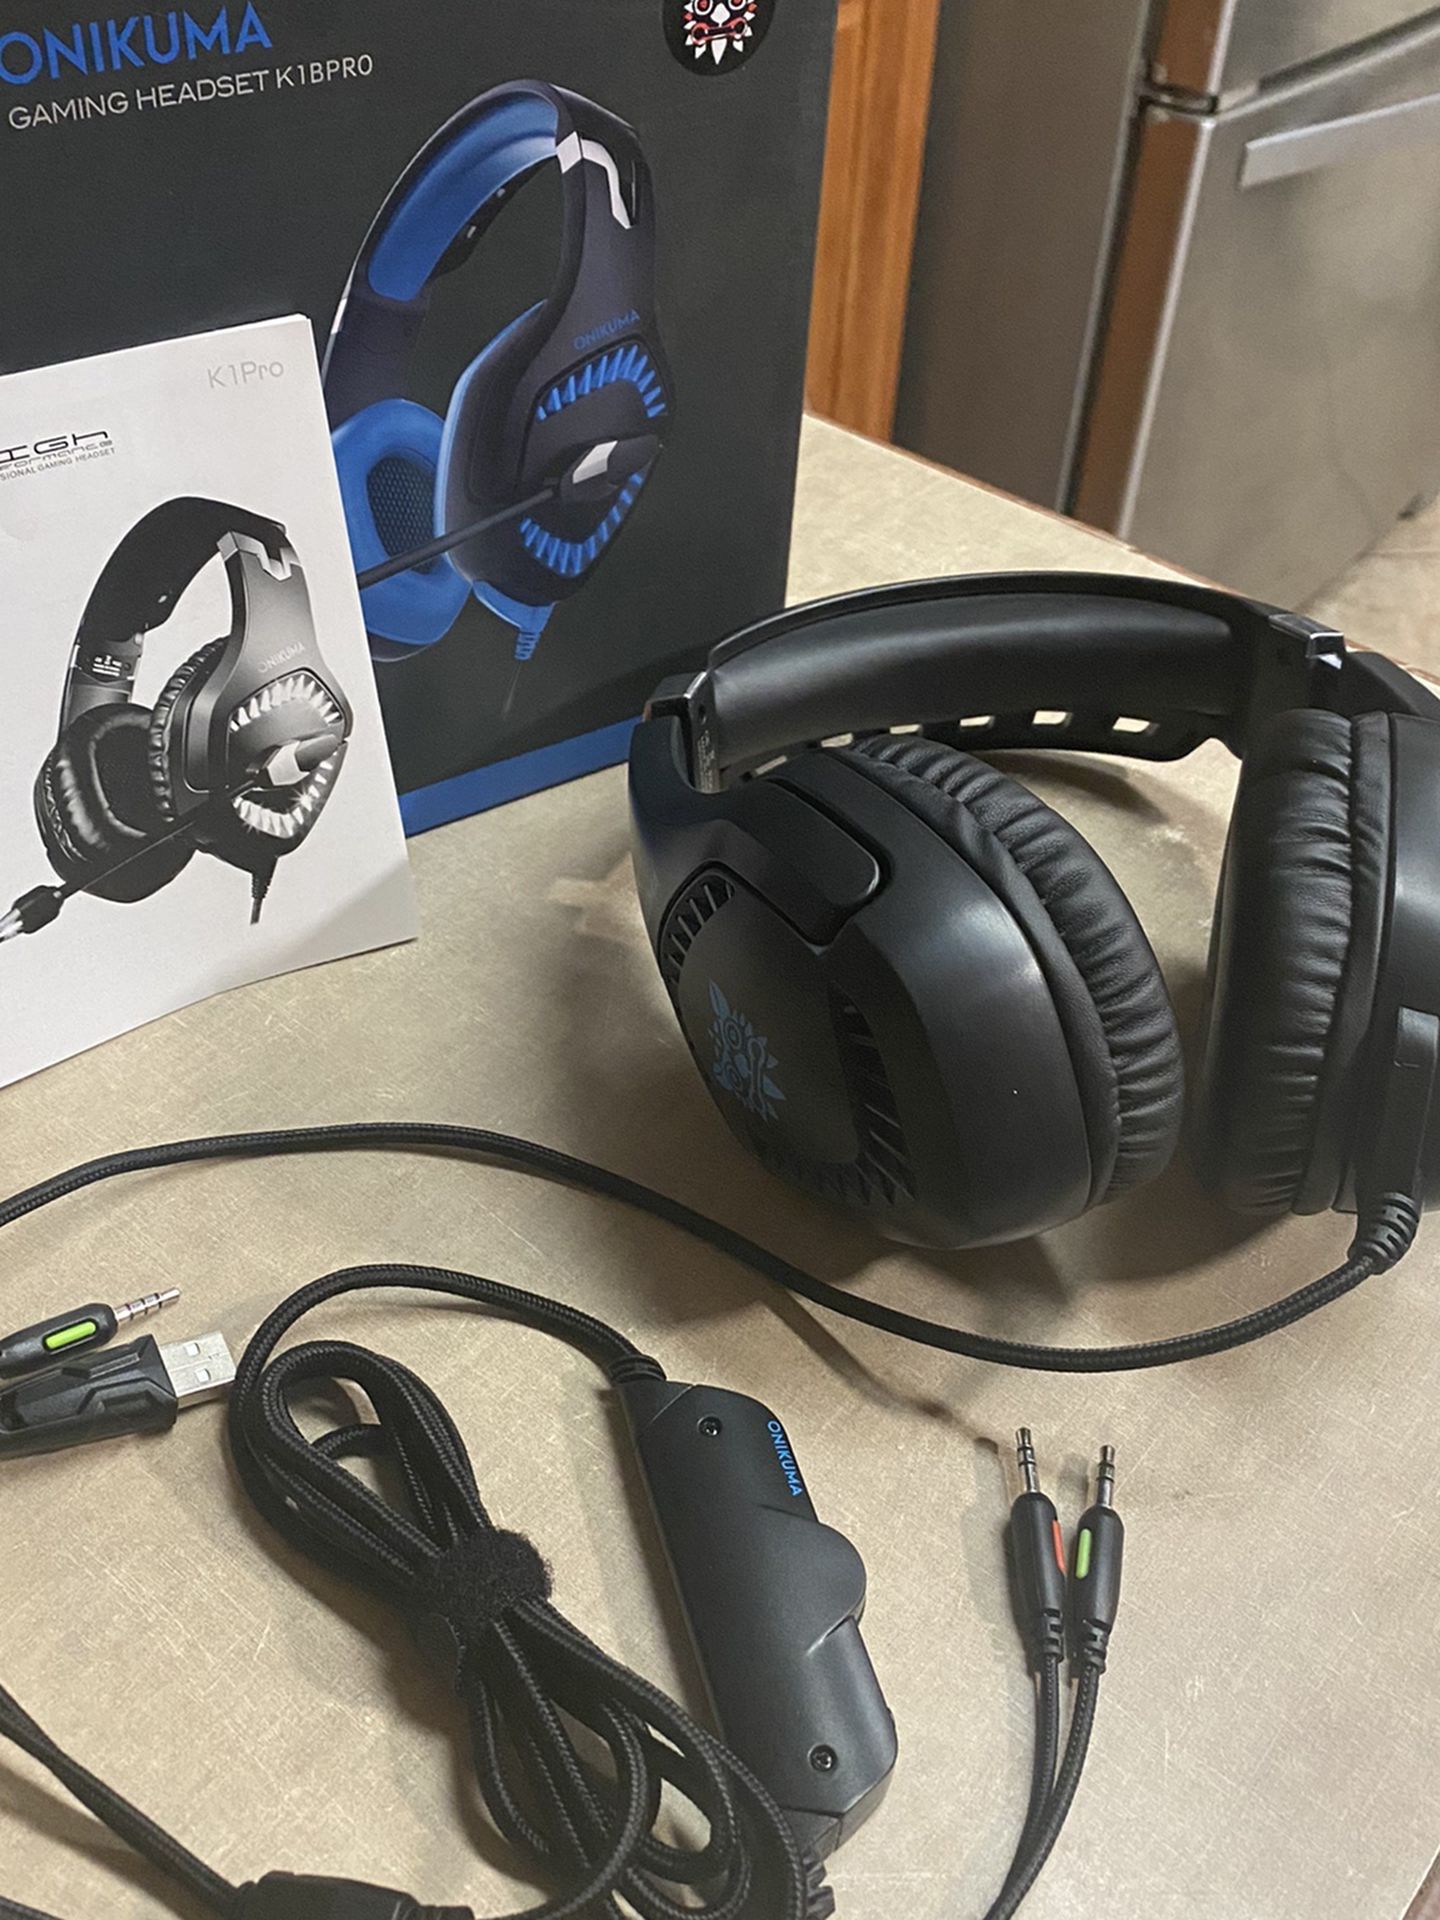 Onikuma New Gaming Headset for PS4, Xbox One (Adapter Not Included), PC with 7.1 Surround Sound, Noise Cancelling Mic, Zero Ear Pressure & D